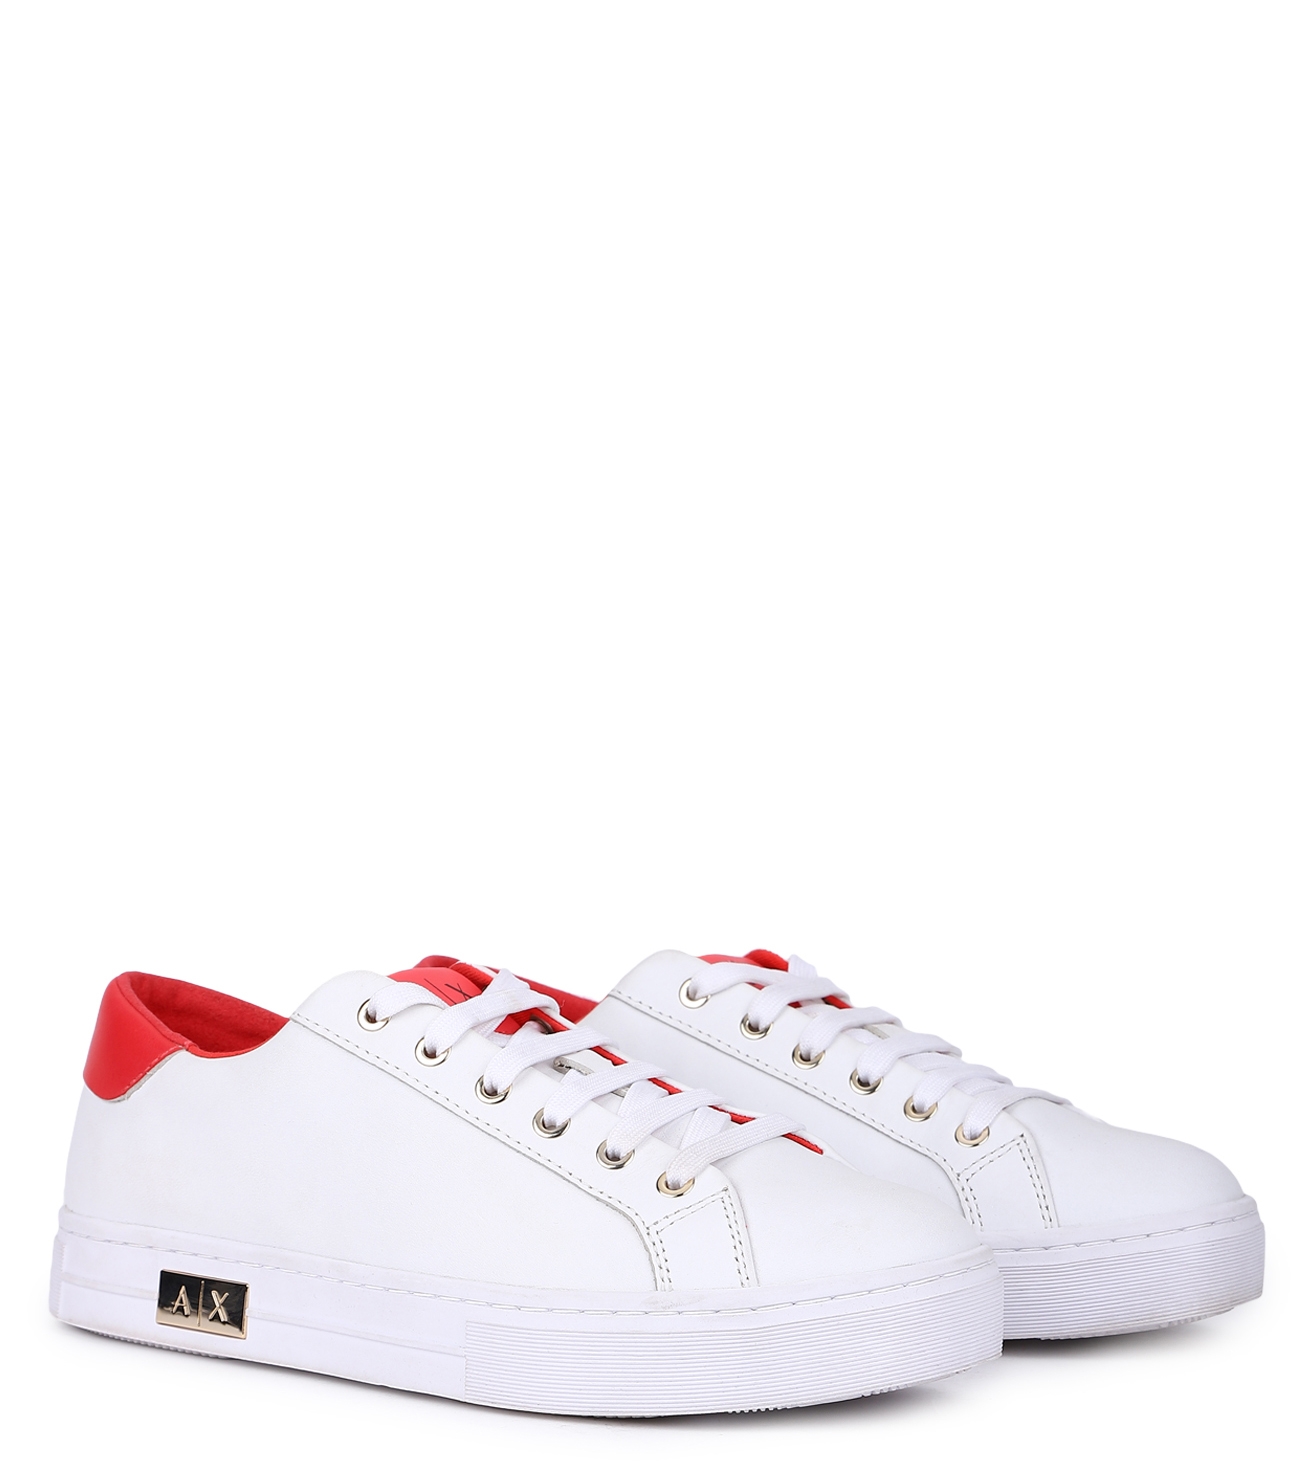 Update more than 179 armani exchange sneakers india